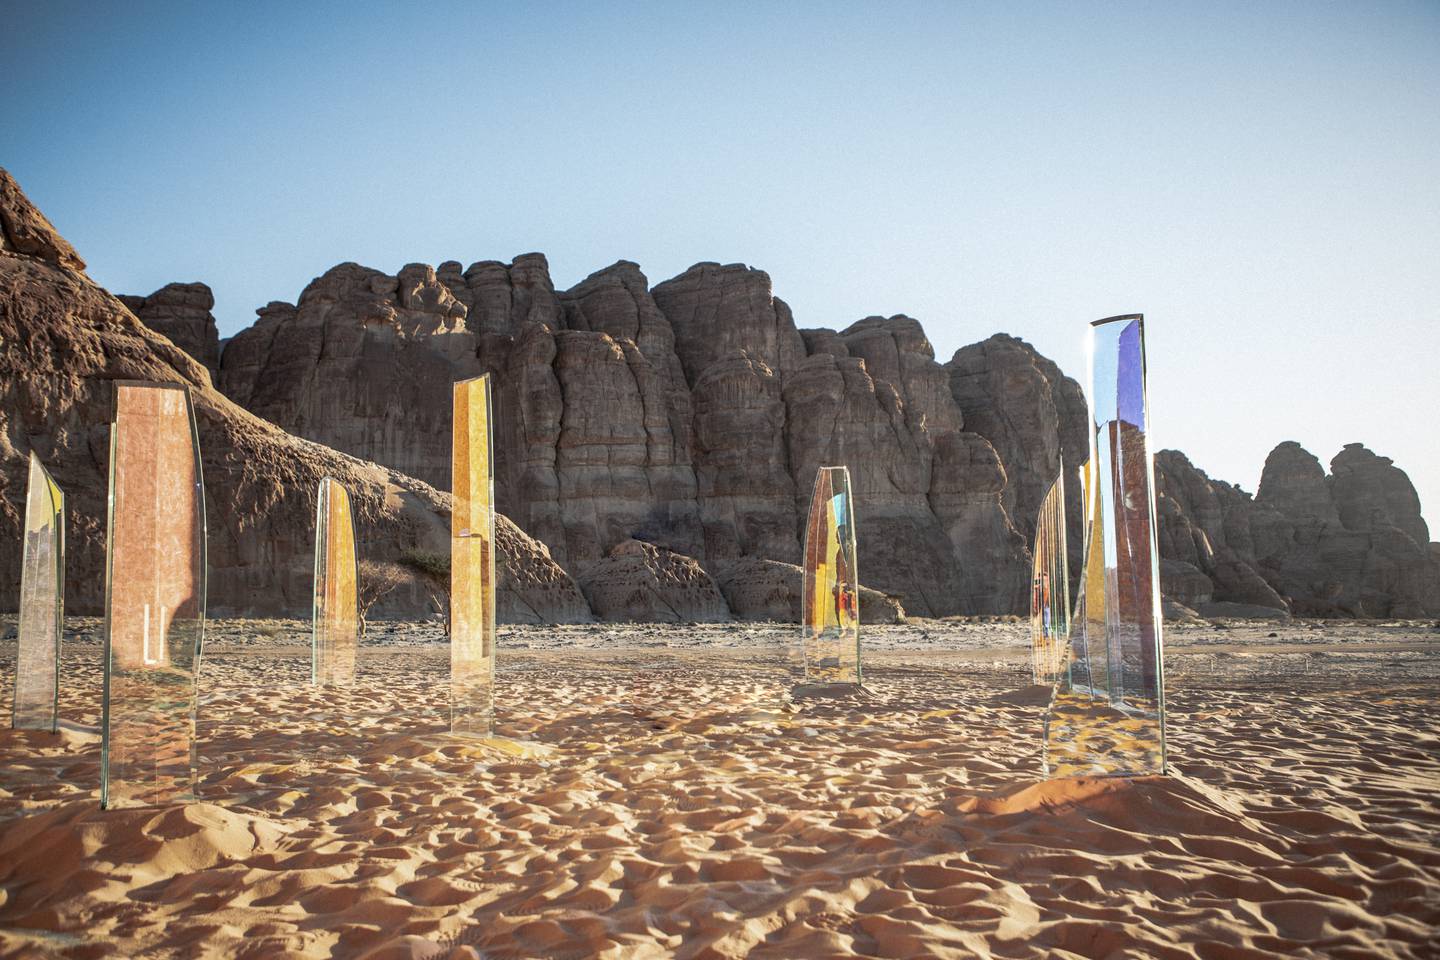 'Horizon of Day and Night' by Shuster + Moseley, a conceptual art studio that will be showcasing its work at Dubai Design Week 2021. Photo: Roman Scott